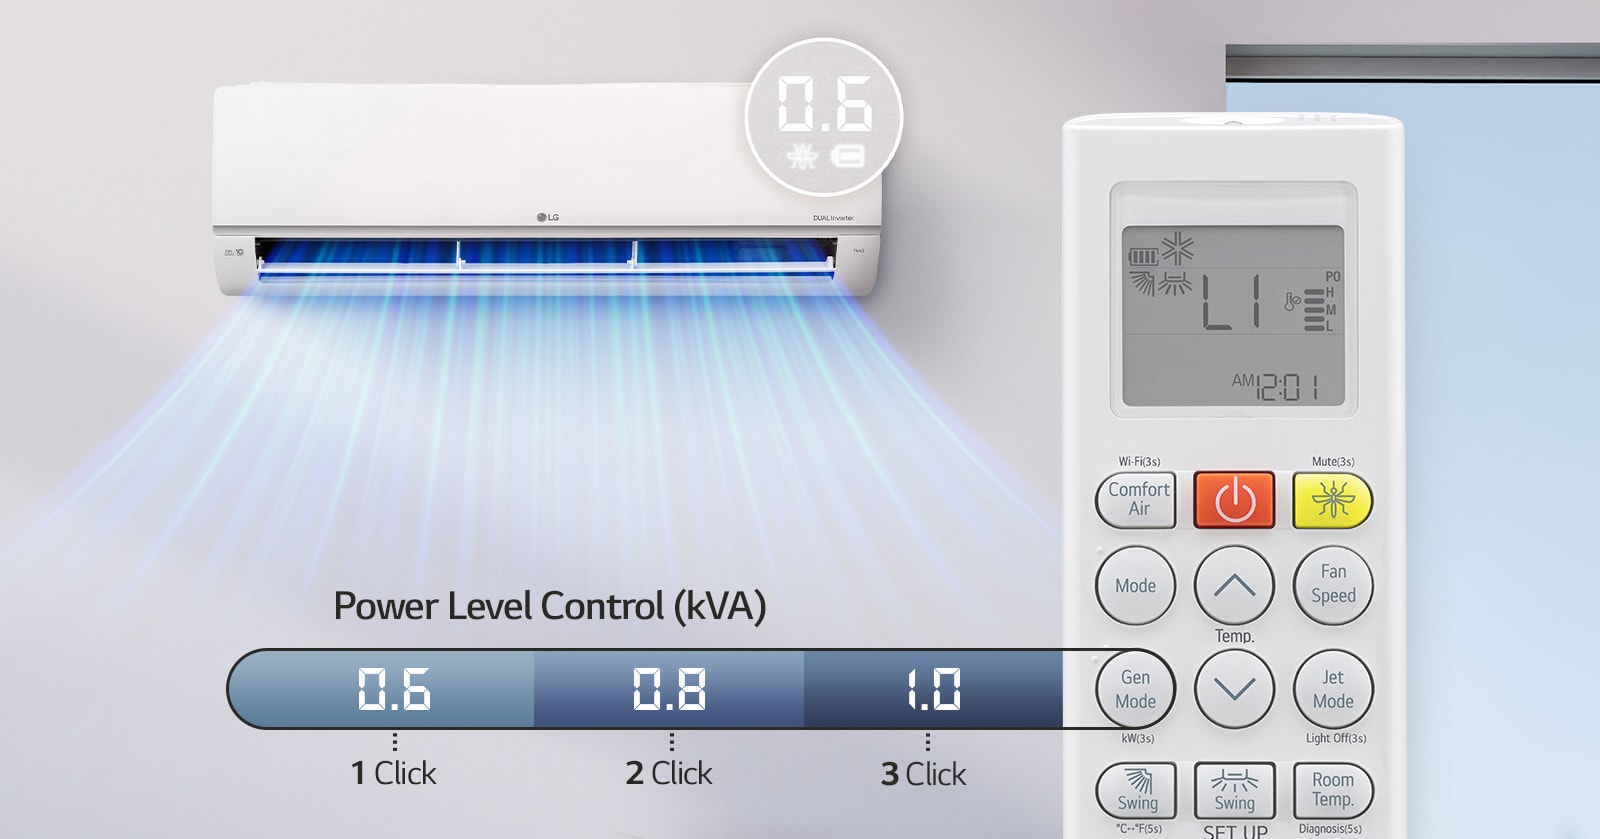 An air conditioner that allows setting the power in three steps via the remote control.